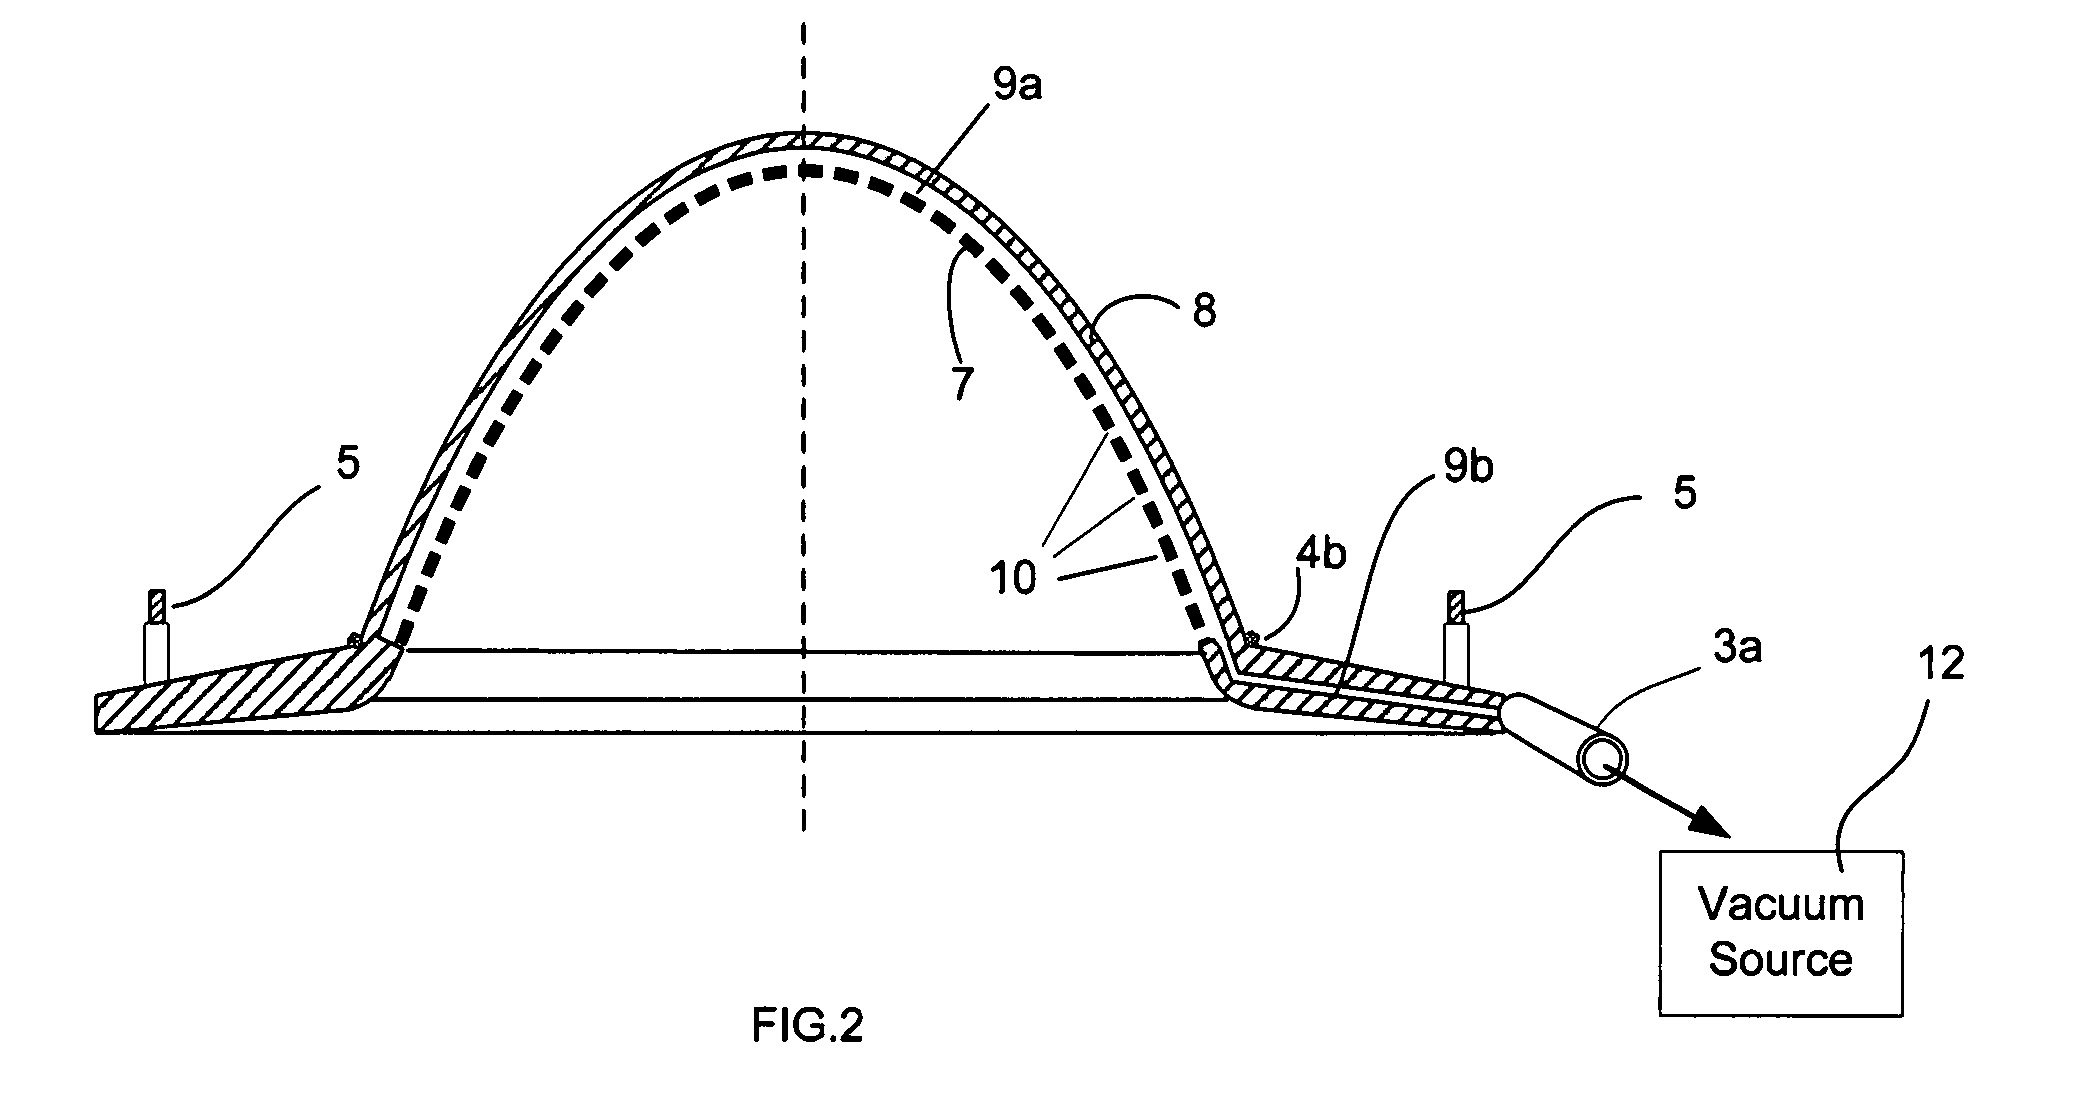 Method and device for immobilization of the human breast in a prone position for radiotherapy